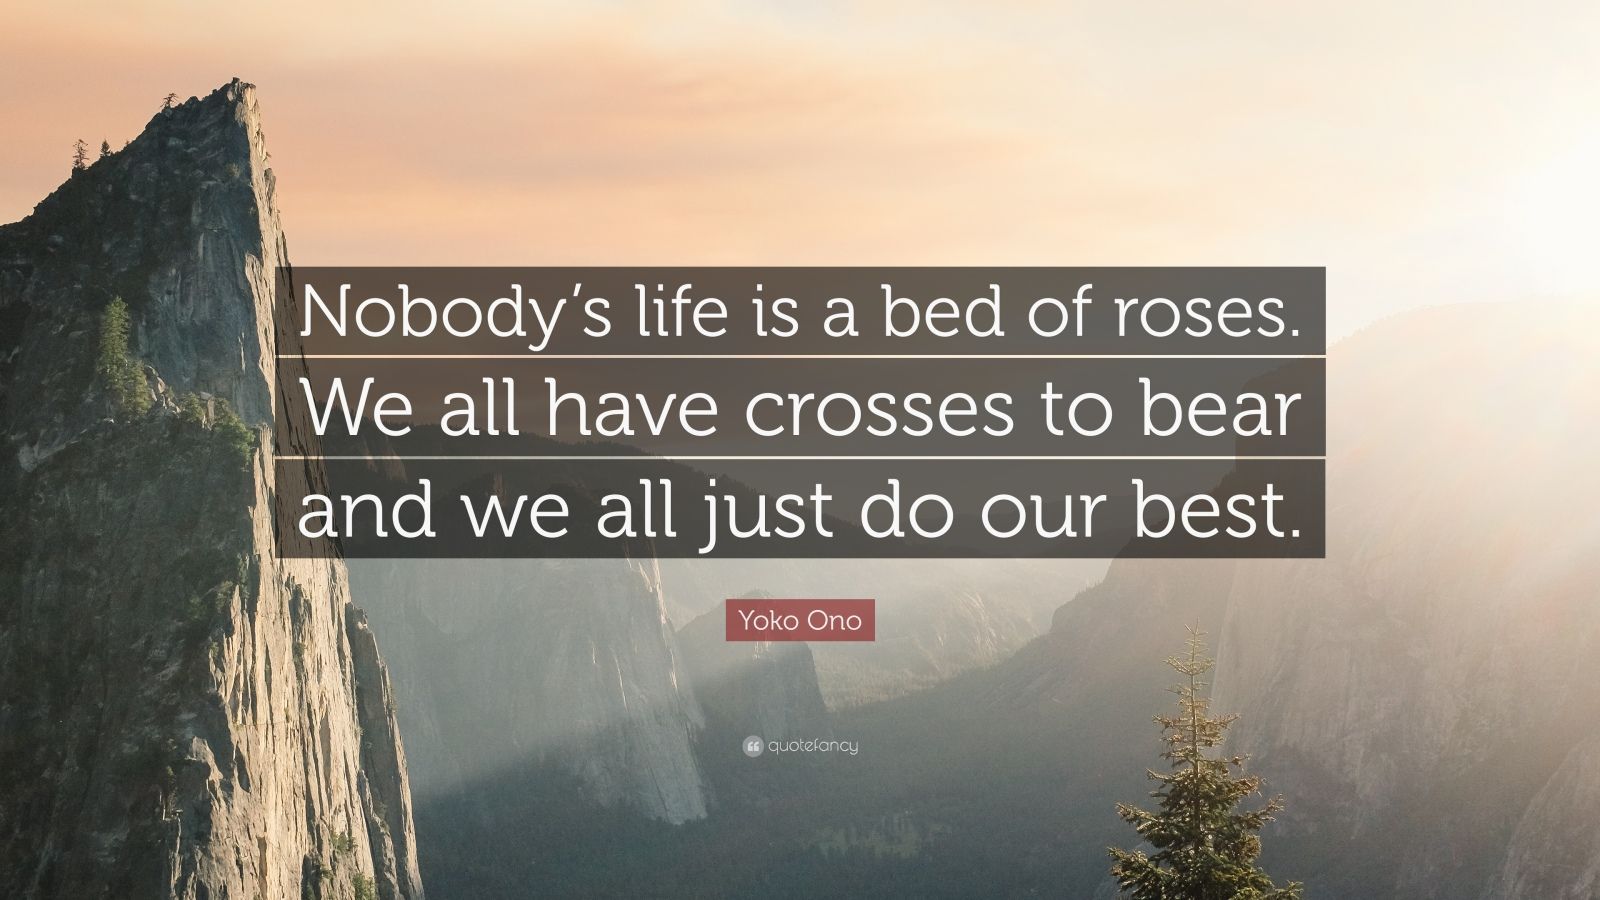 Free Essays on Life Is Not Bed Of Roses through